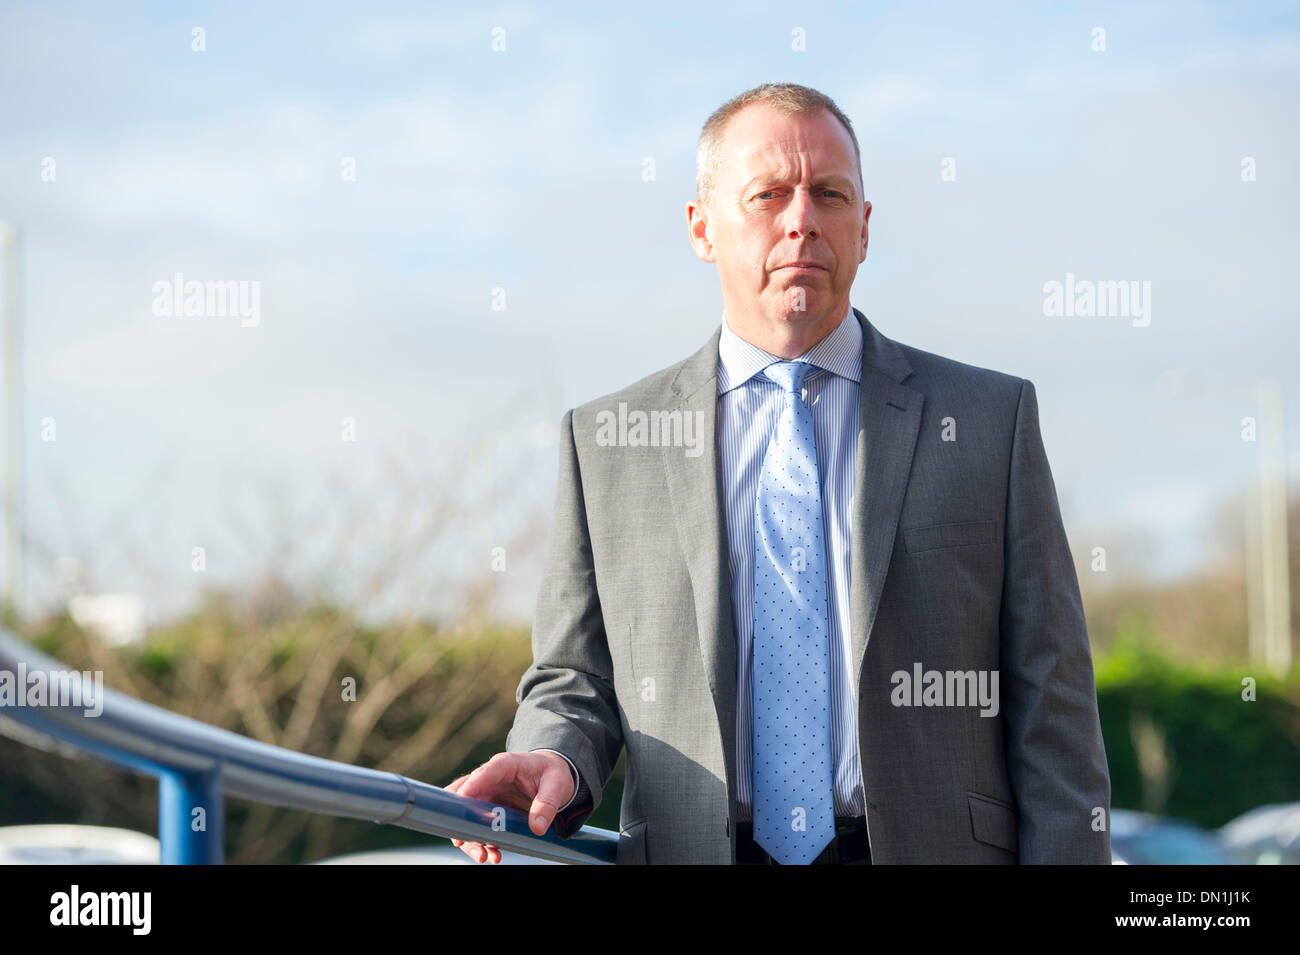 Bridgend, Wales, UK. 17th December 2013. Detective Chief Inspector Peter Doyle, senior investigating officer in the Ian Watkins investigation, gives an interview to the press on December 17, 2013 at Bridgend Police Headquarters, Bridgend, Wales. (Photo by Matthew Horwood/Alamy Live News) Stock Photo